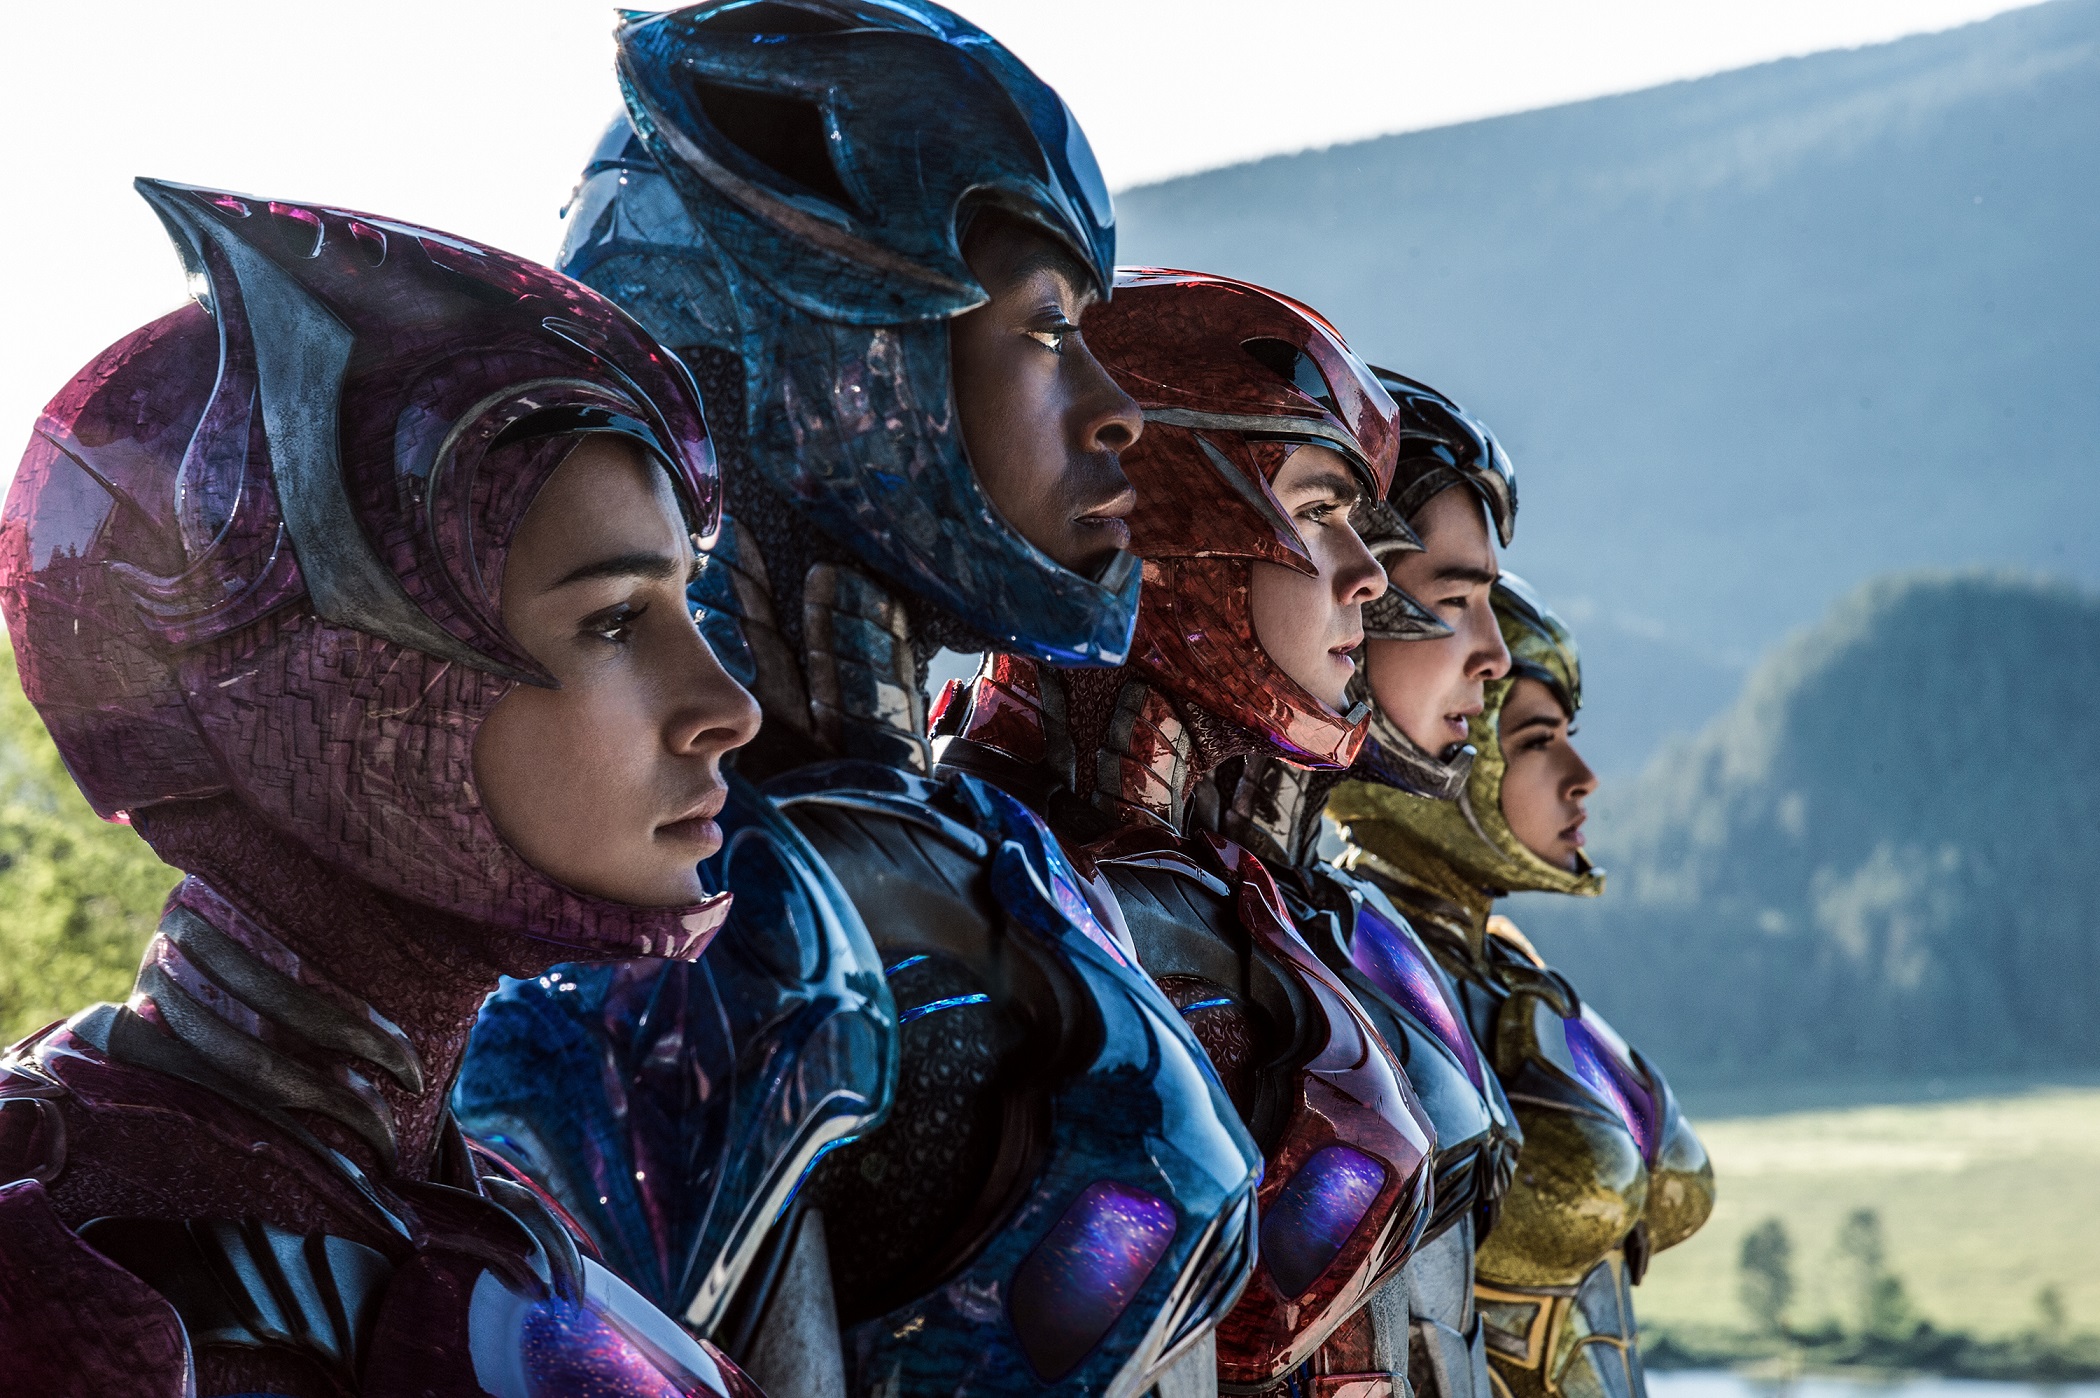 New Image of Power Rangers 2017 Movie Suits Released ...